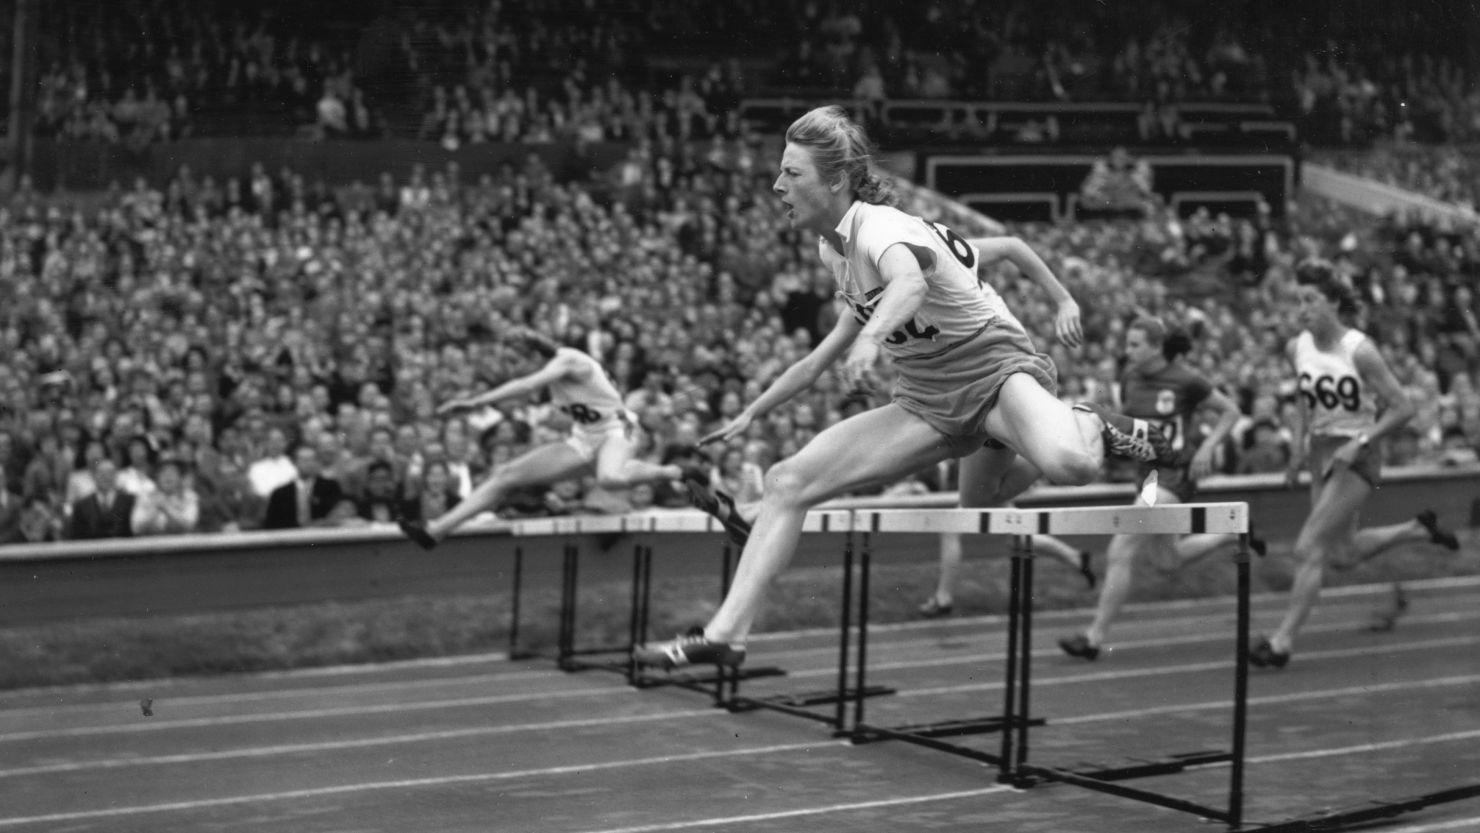 Dutch athlete Fanny Blankers-Koen went where no other woman had gone before or since...